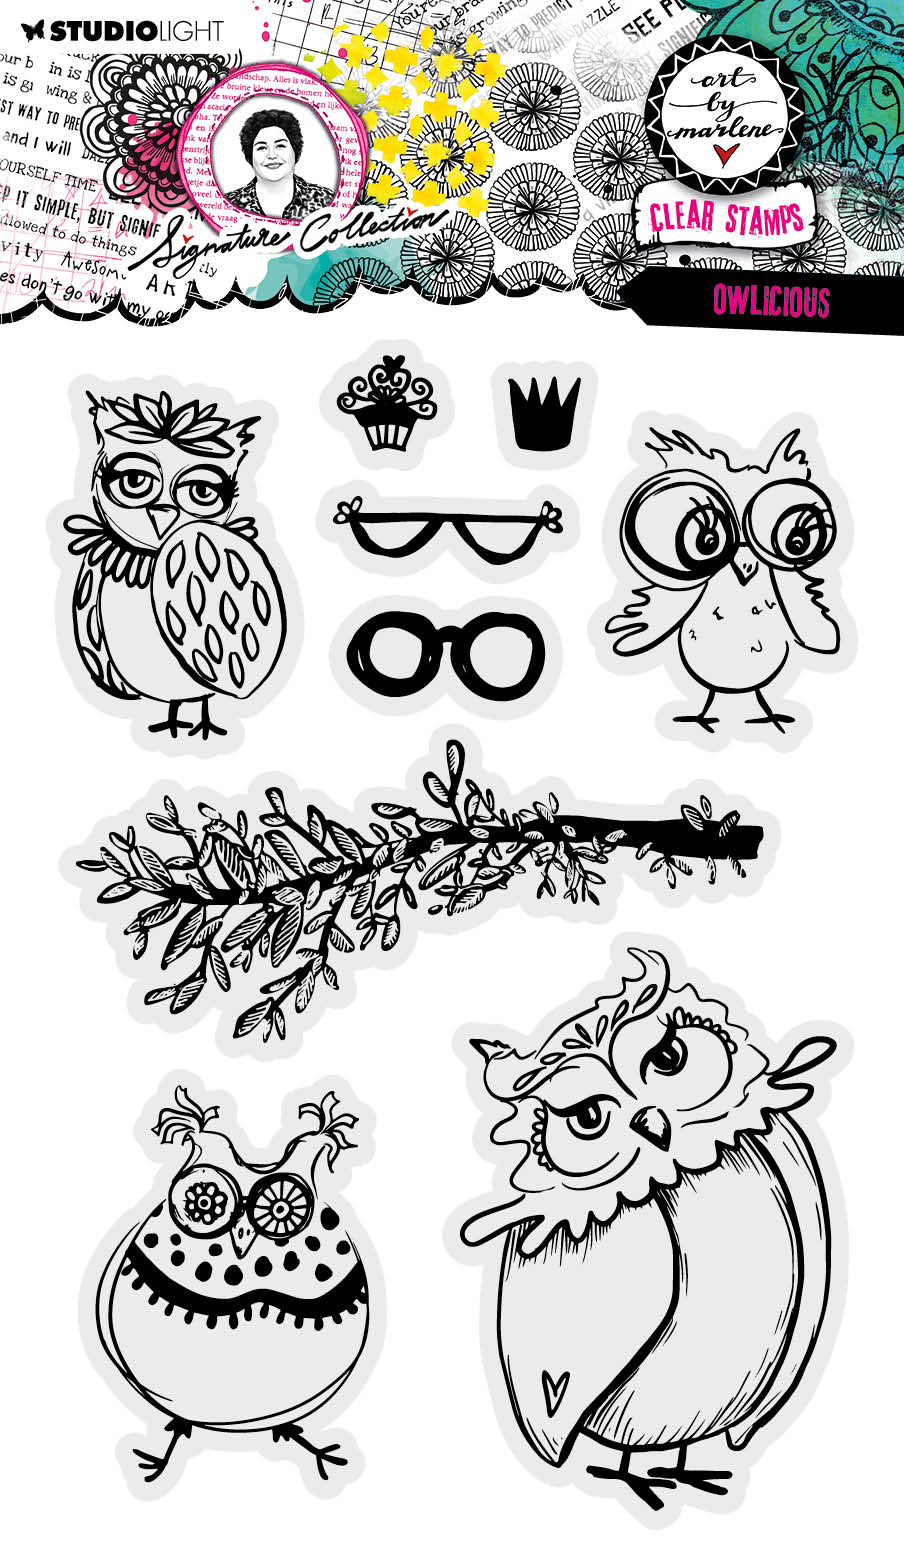 ABM Clear Stamp Owlicious Signature Collection 148x210x3mm 9 PC nr.637